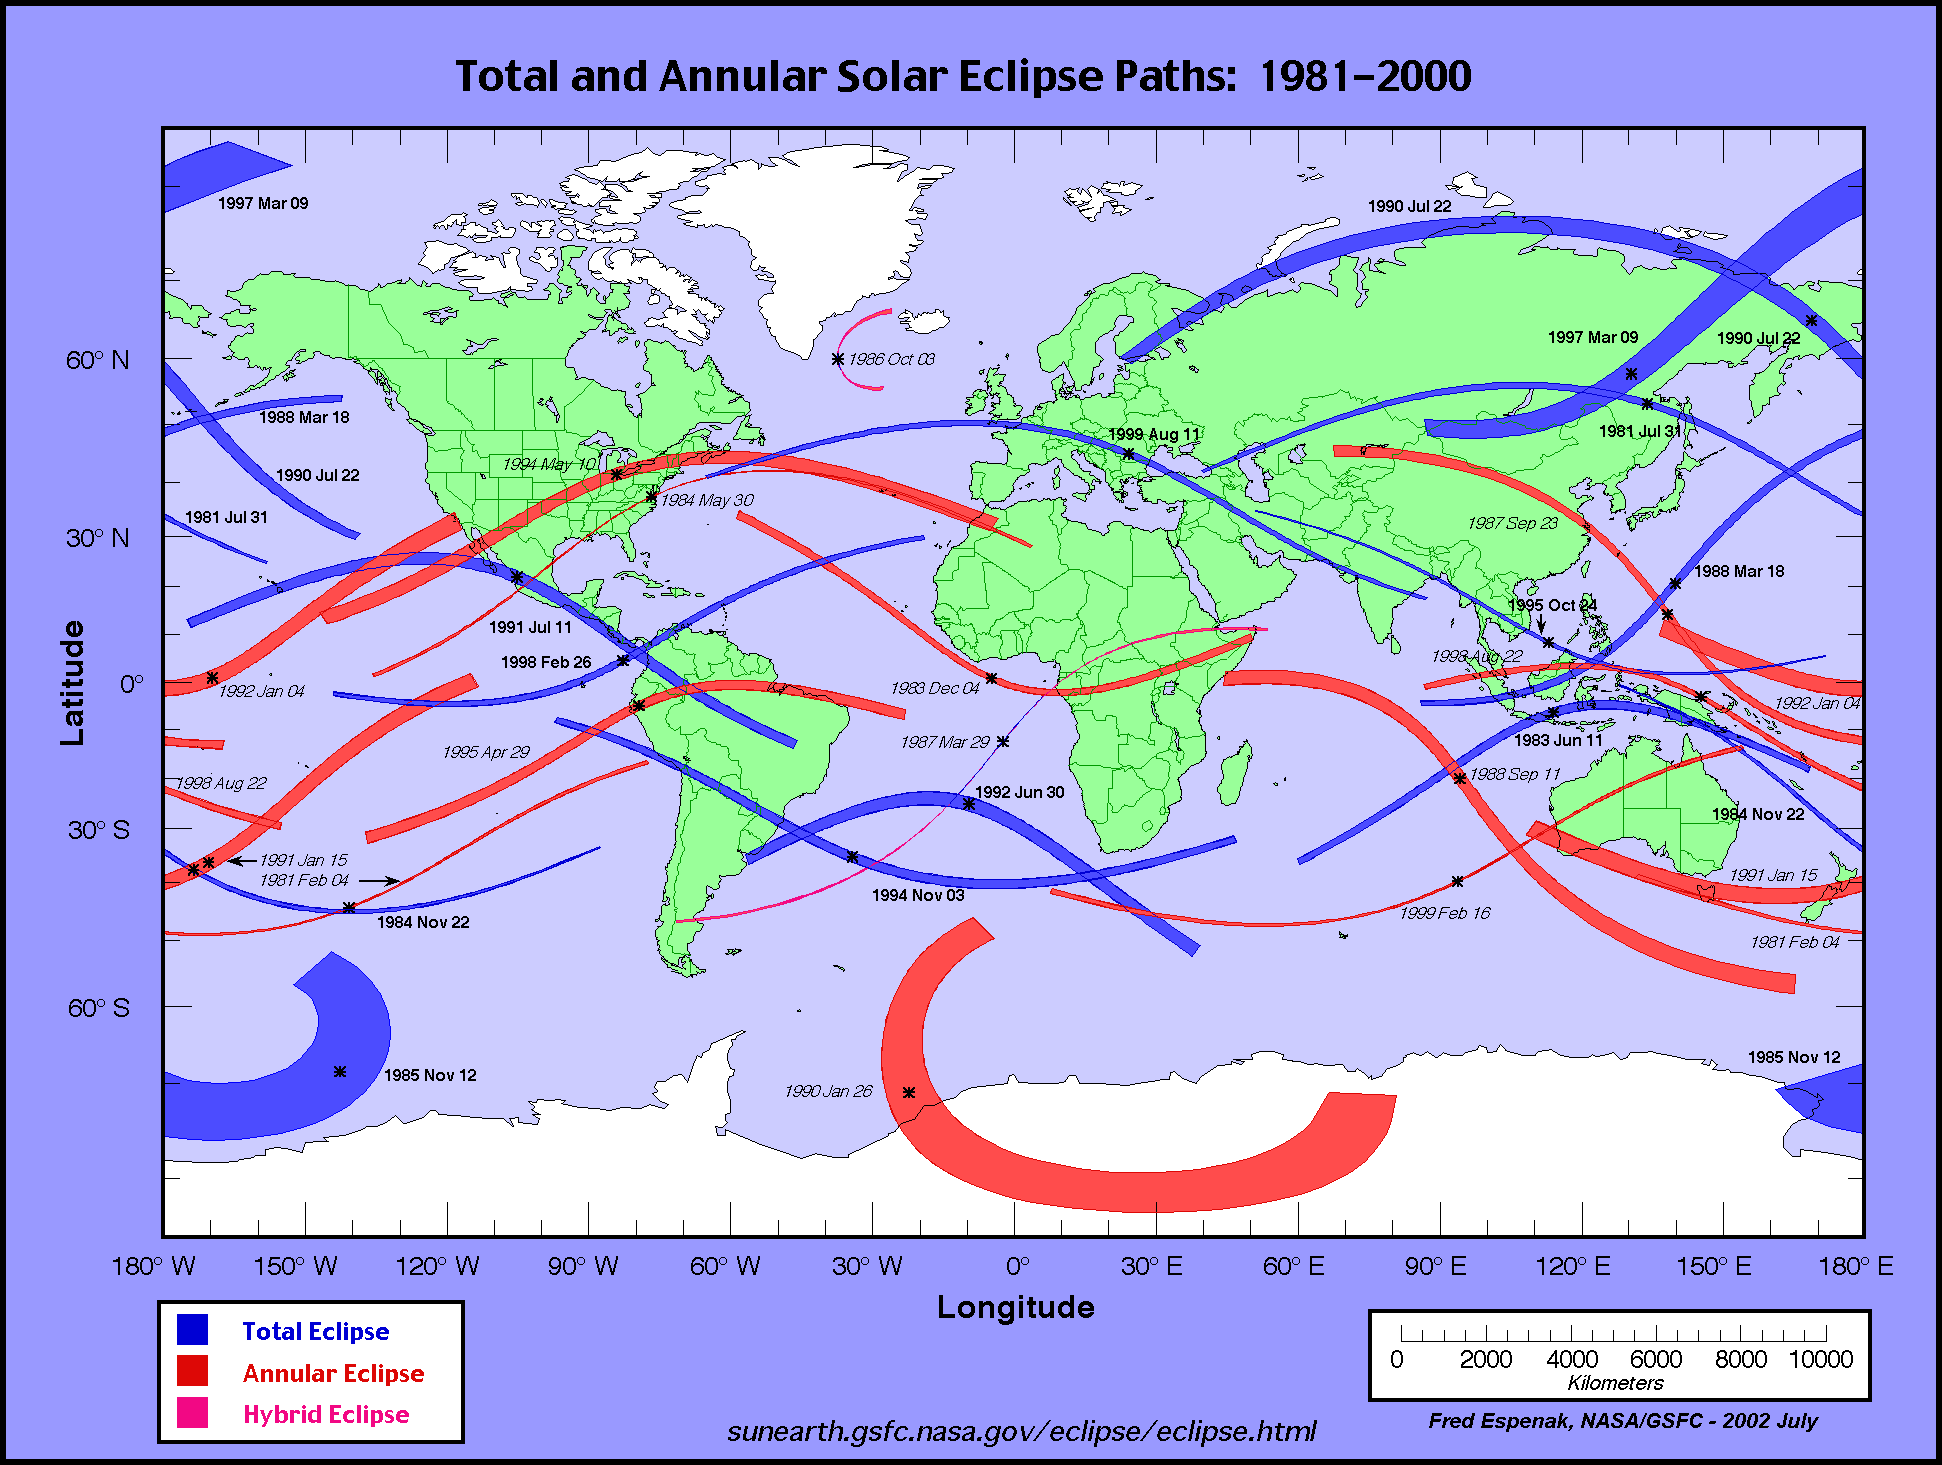 Calendar and solar eclipse maps from 1981 to 2000